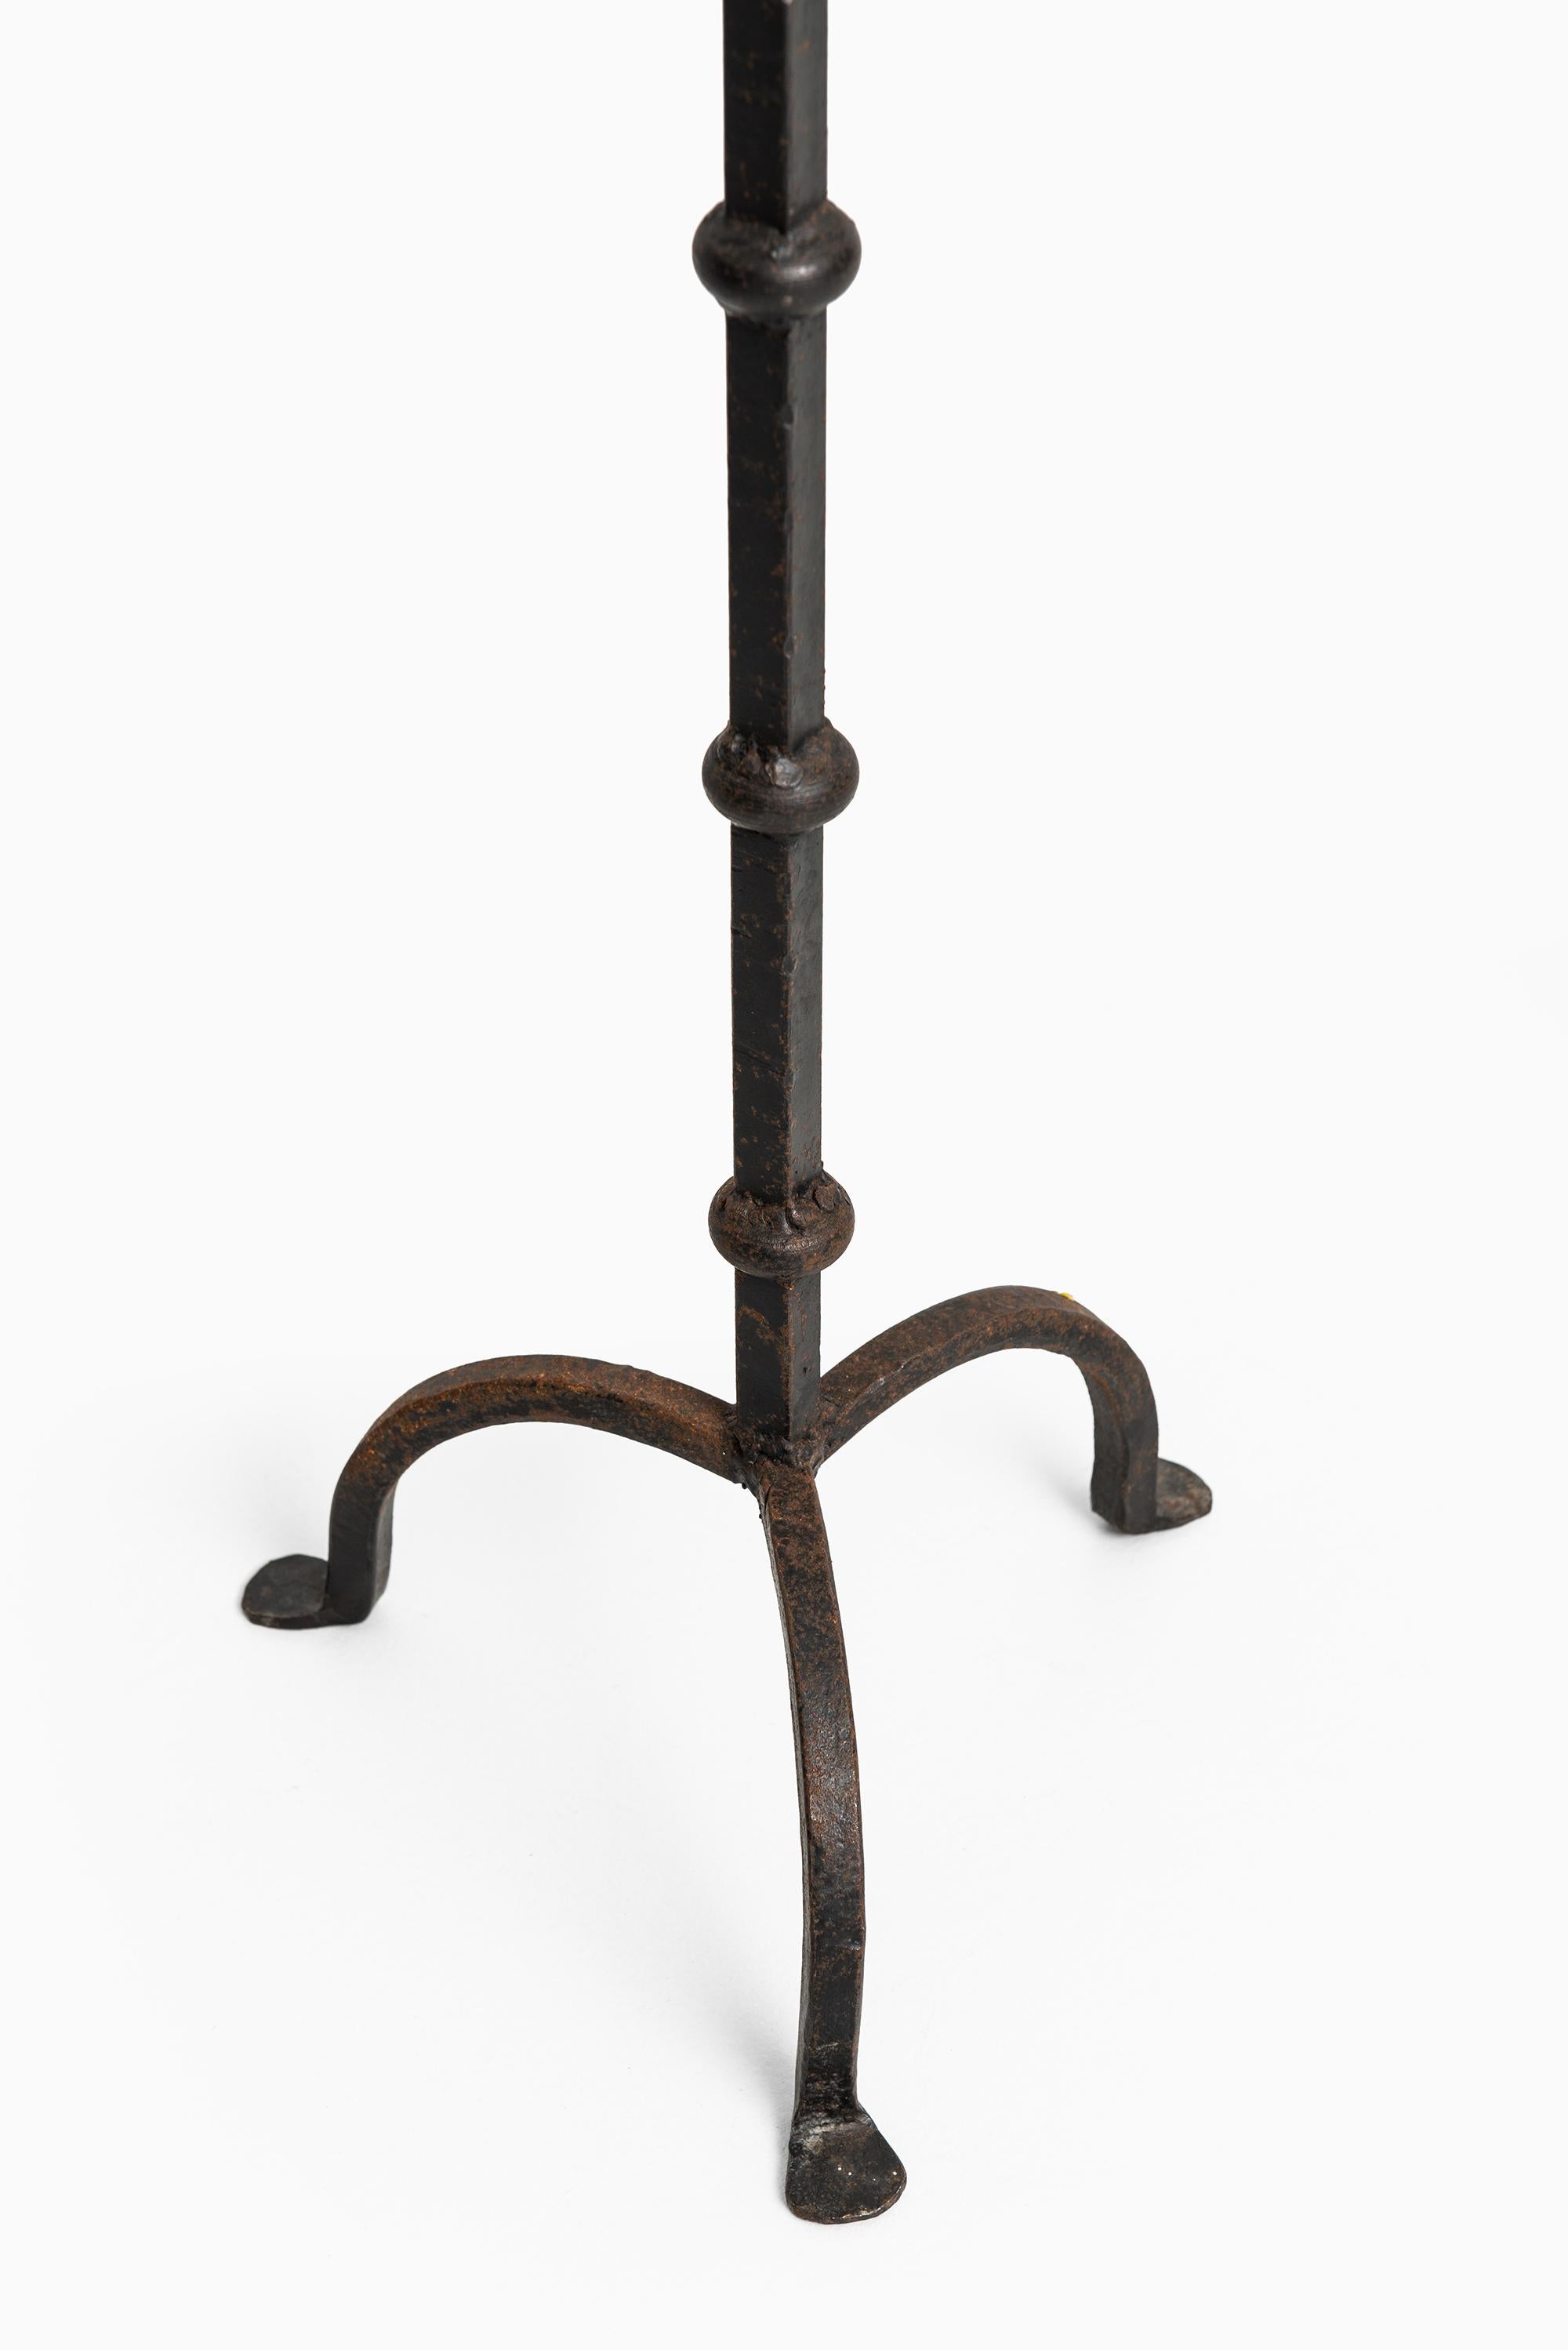 Scandinavian Modern Large Candlestick in Wrought Iron Produced in Sweden